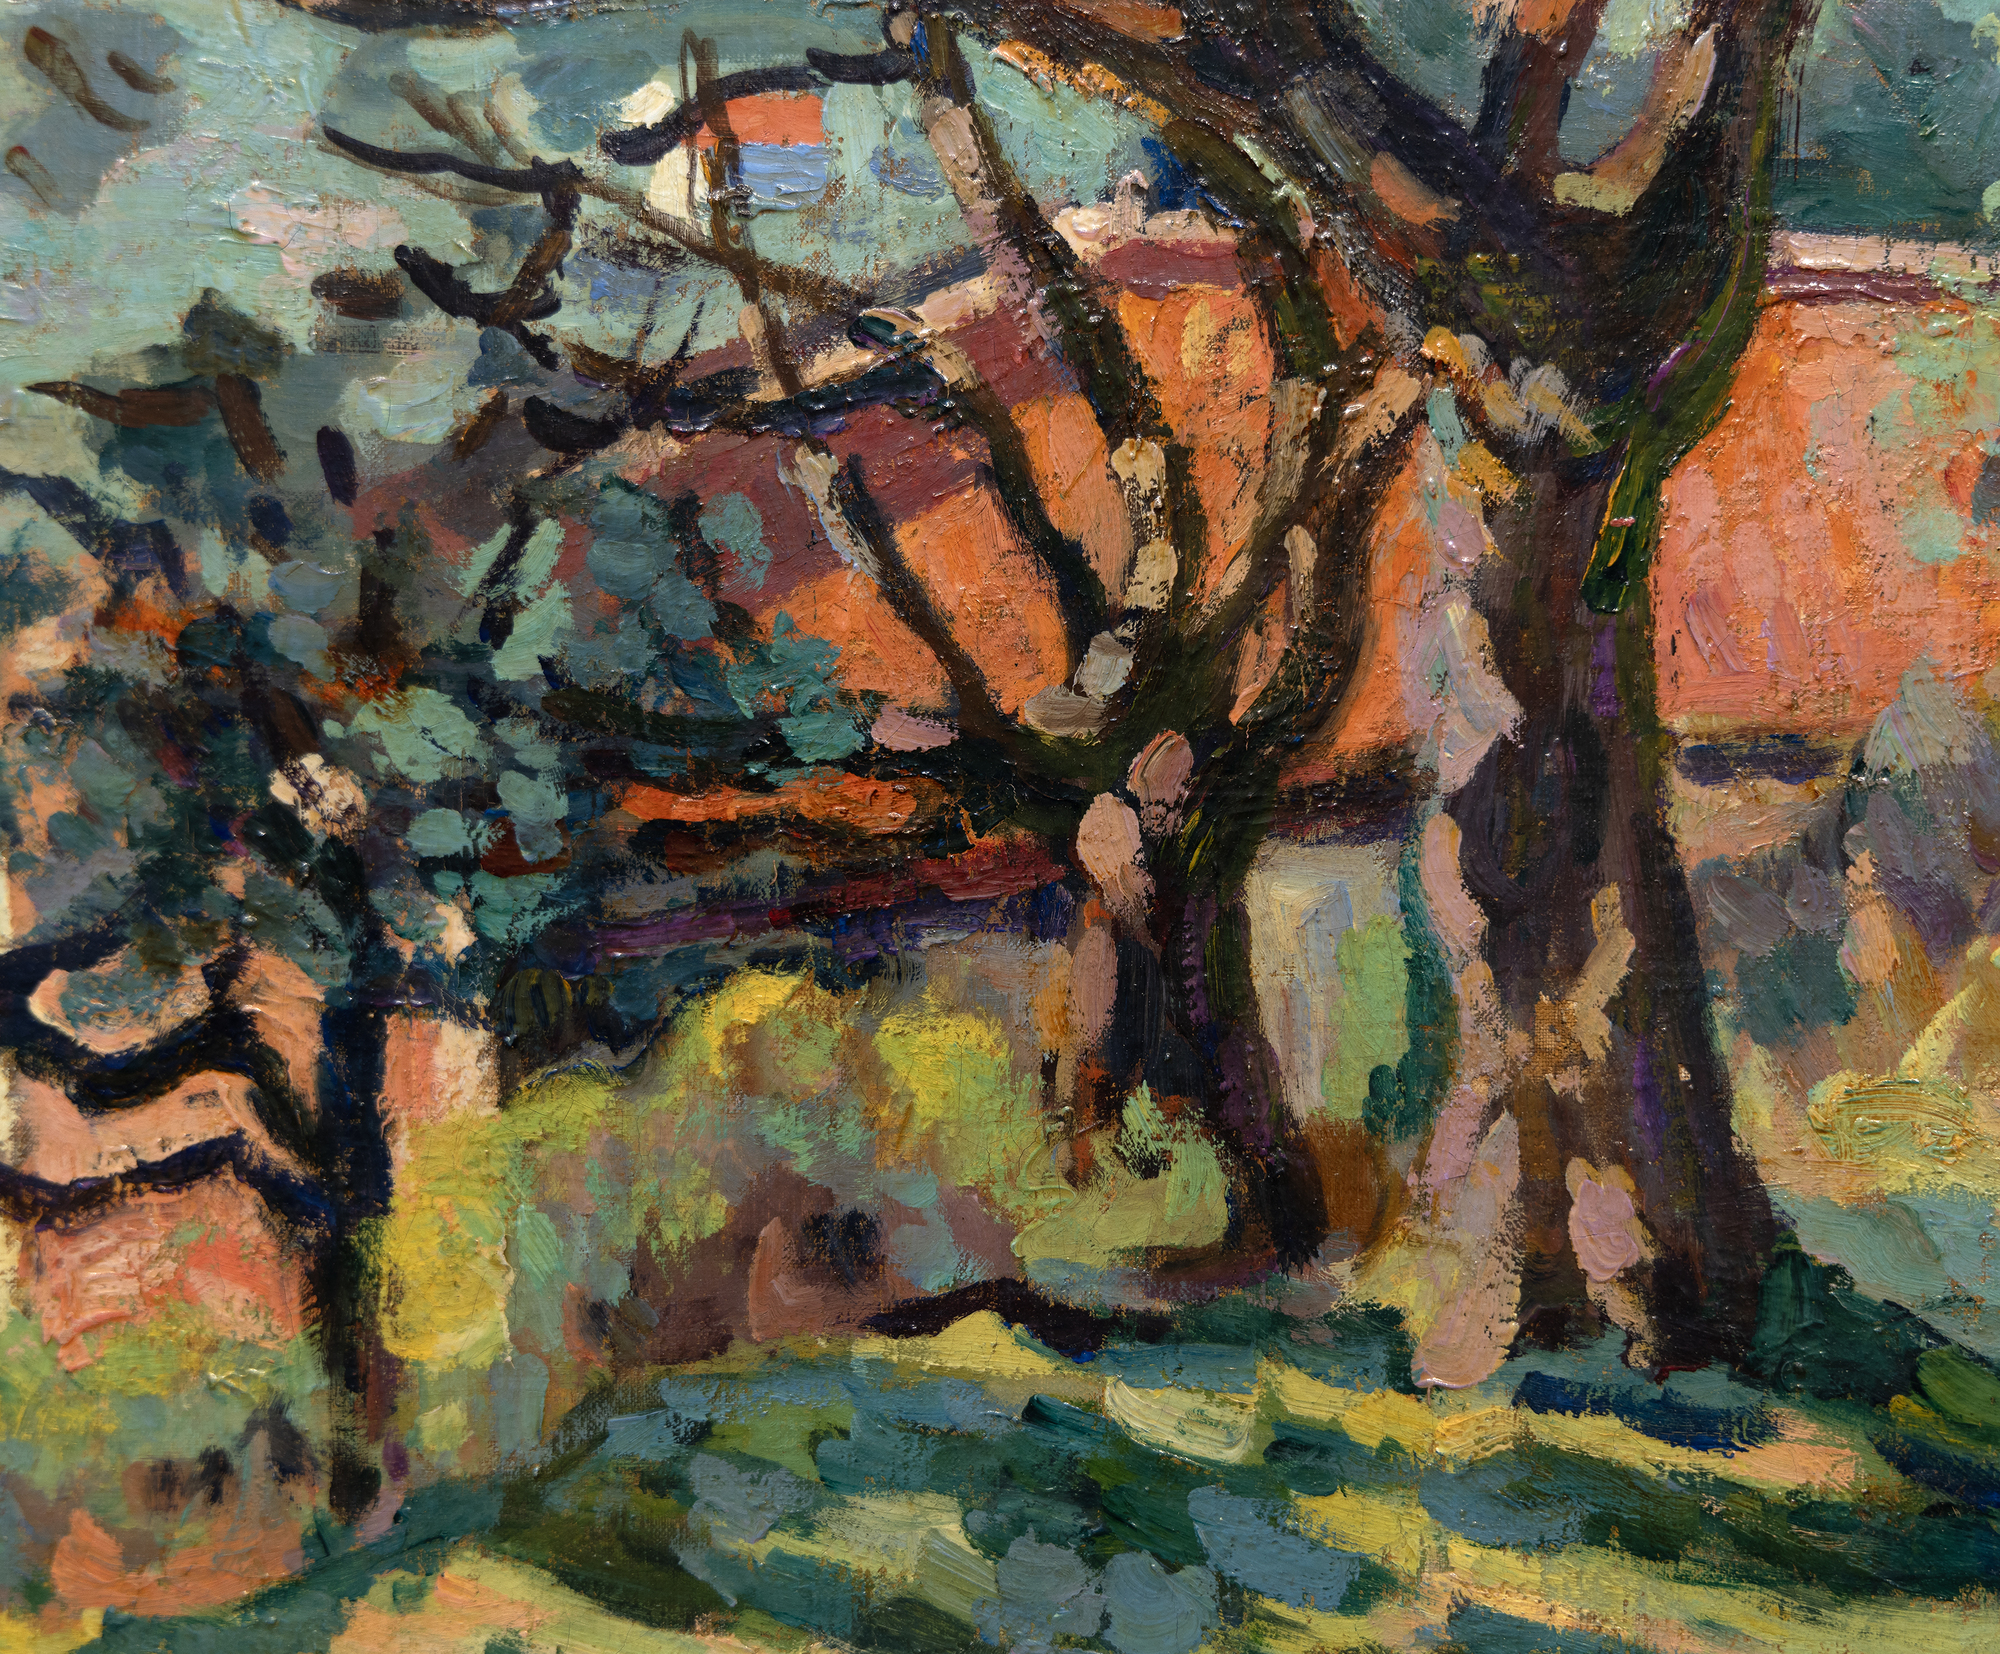 ARMAND GUILLAUMIN - Roquebrune, Le Matin - oil on canvas - 25 x 31 1/4 in.